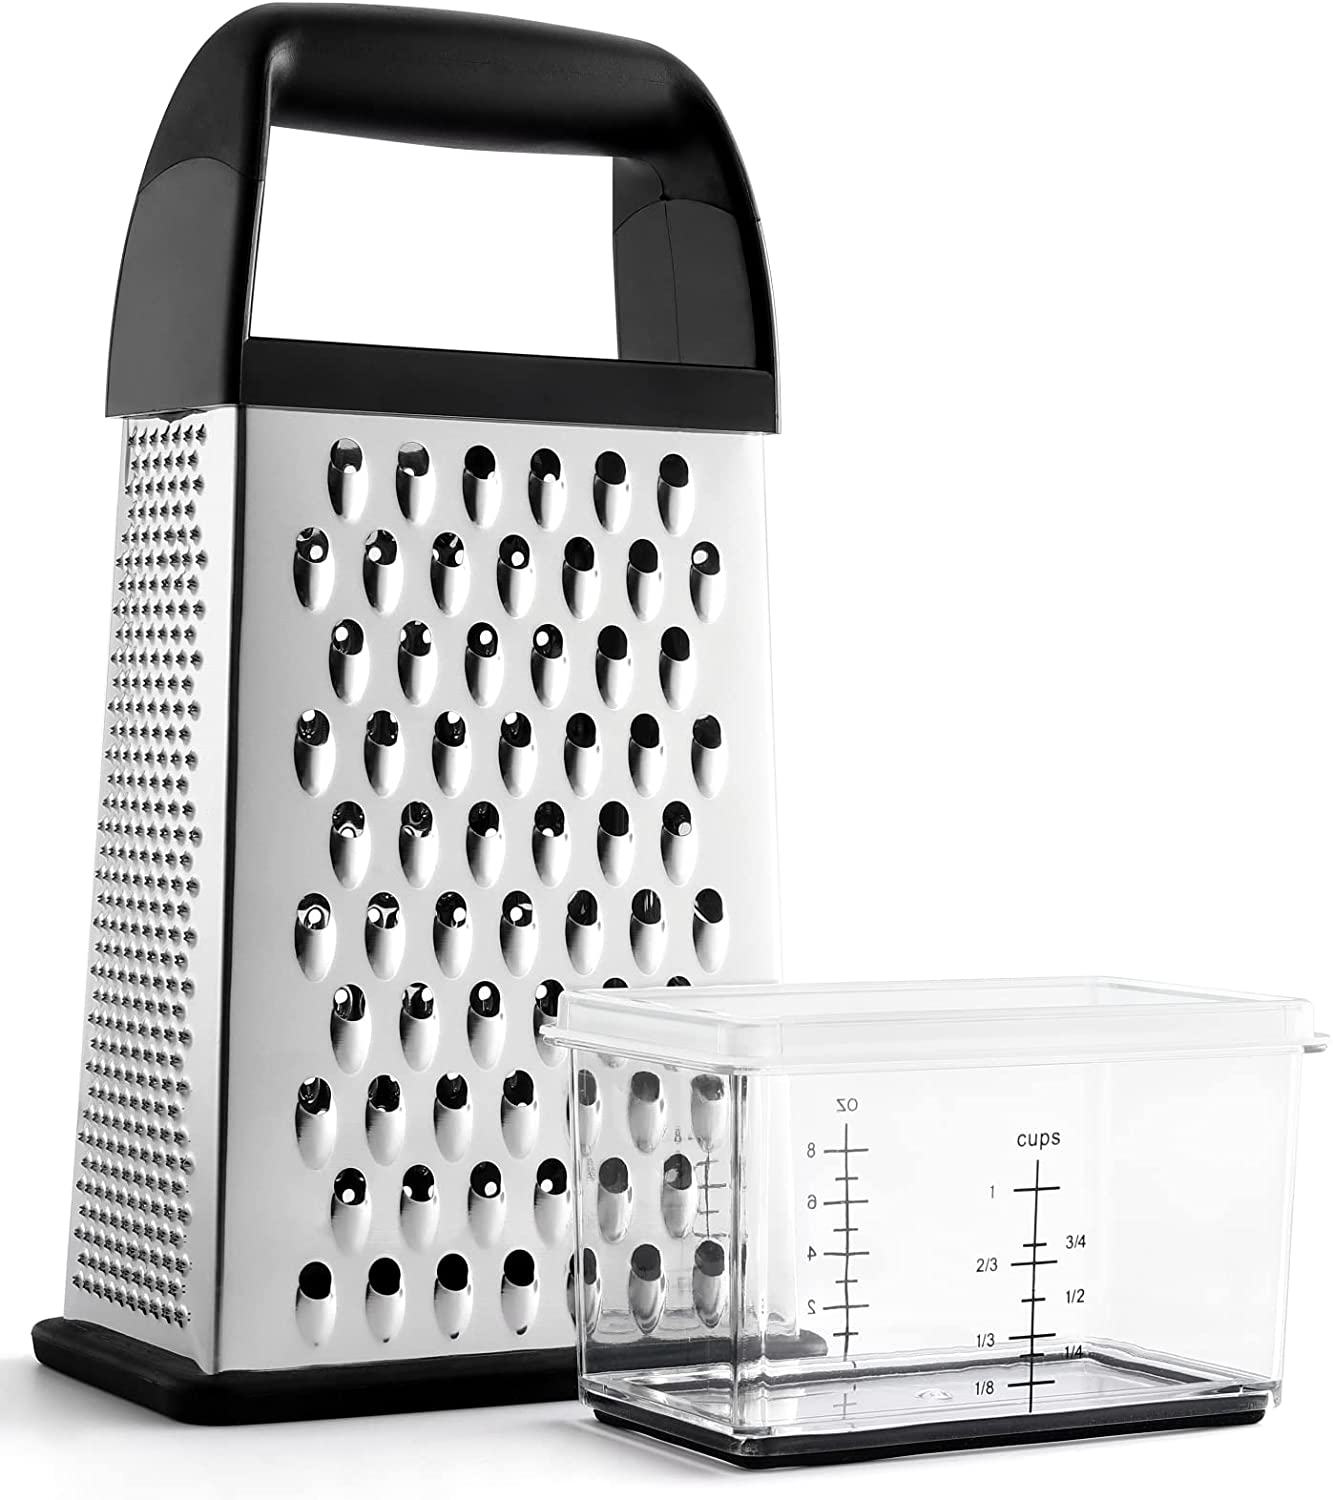 Gorilla Grip Box Grater, Stainless Steel, 4-Sided Graters with Comfortable Handle and Storage Container for Cheese, Vegetables, Ginger, Handheld Food